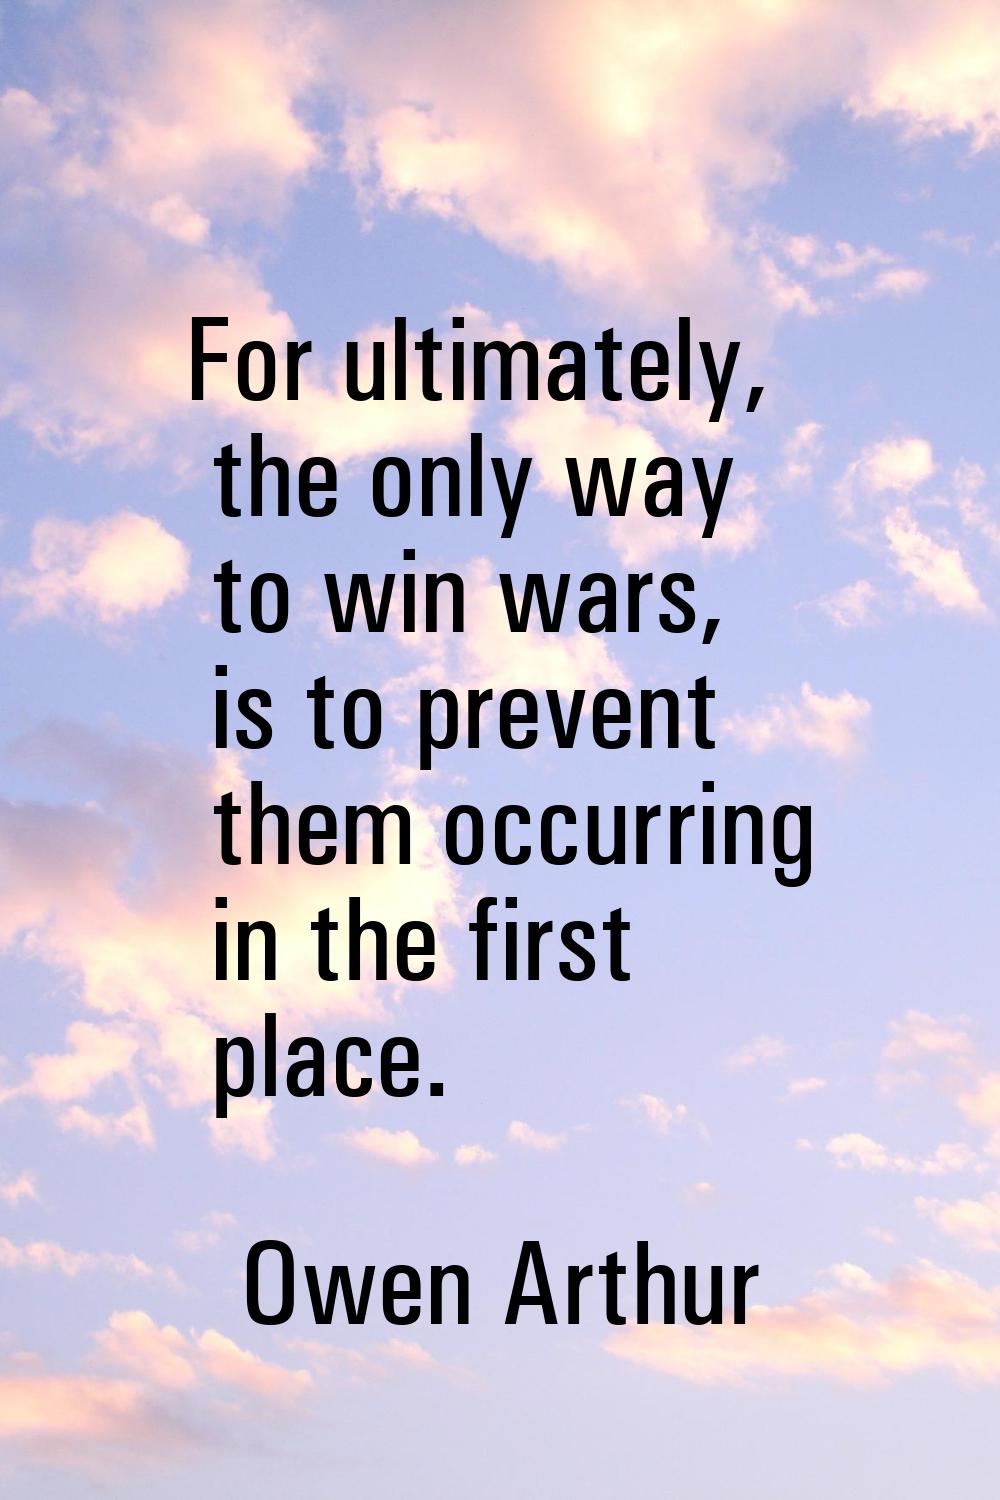 For ultimately, the only way to win wars, is to prevent them occurring in the first place.